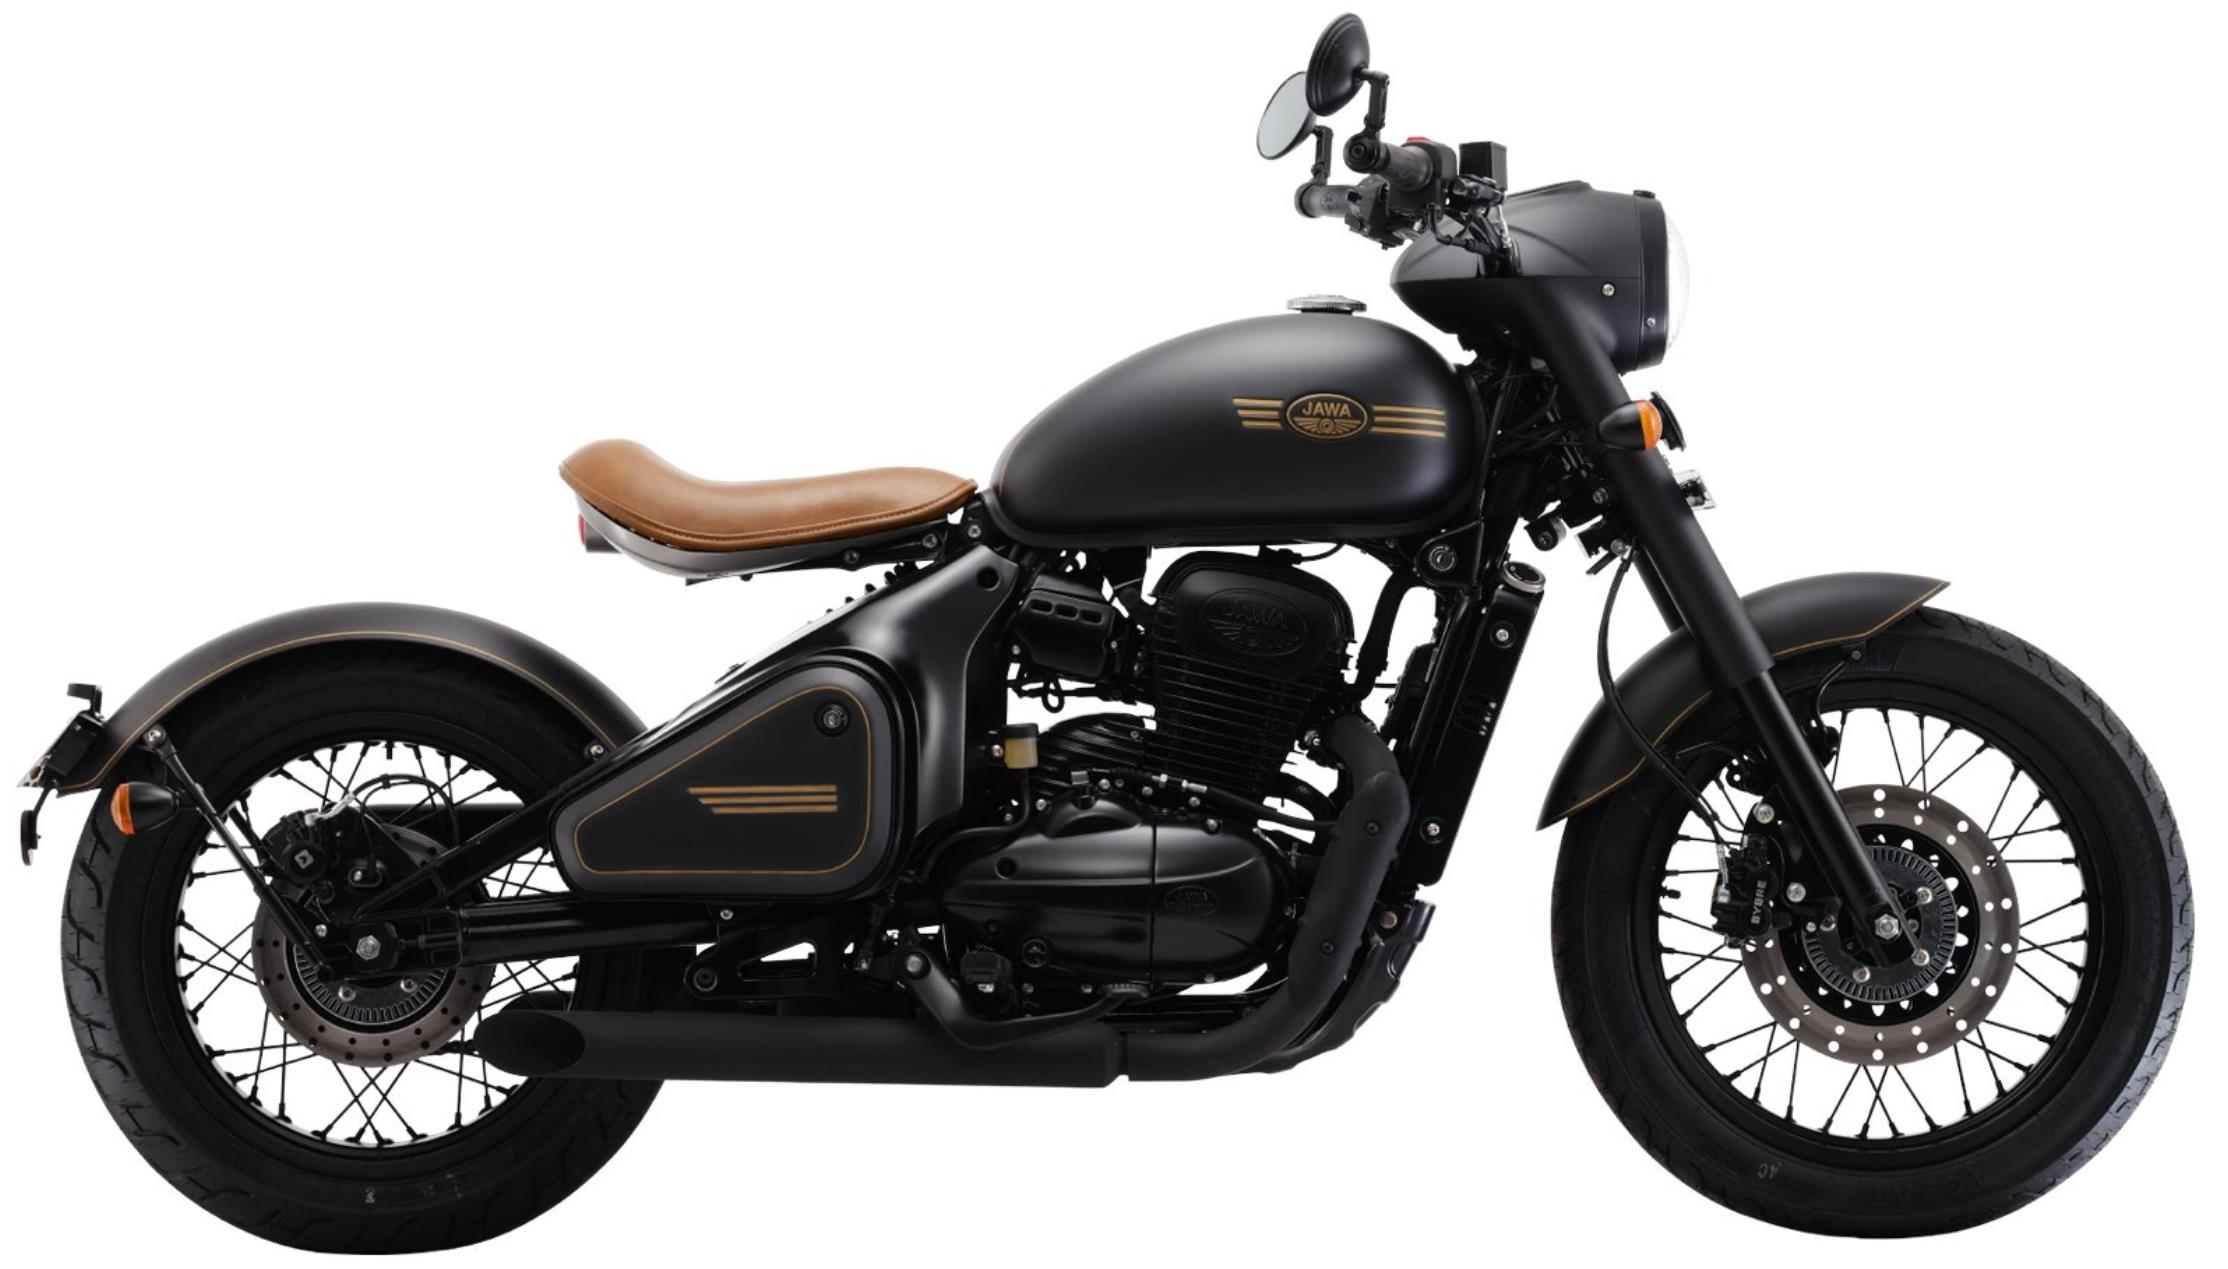 New Jawa Perak Bobber BS6 Price in India  Full Specifications 